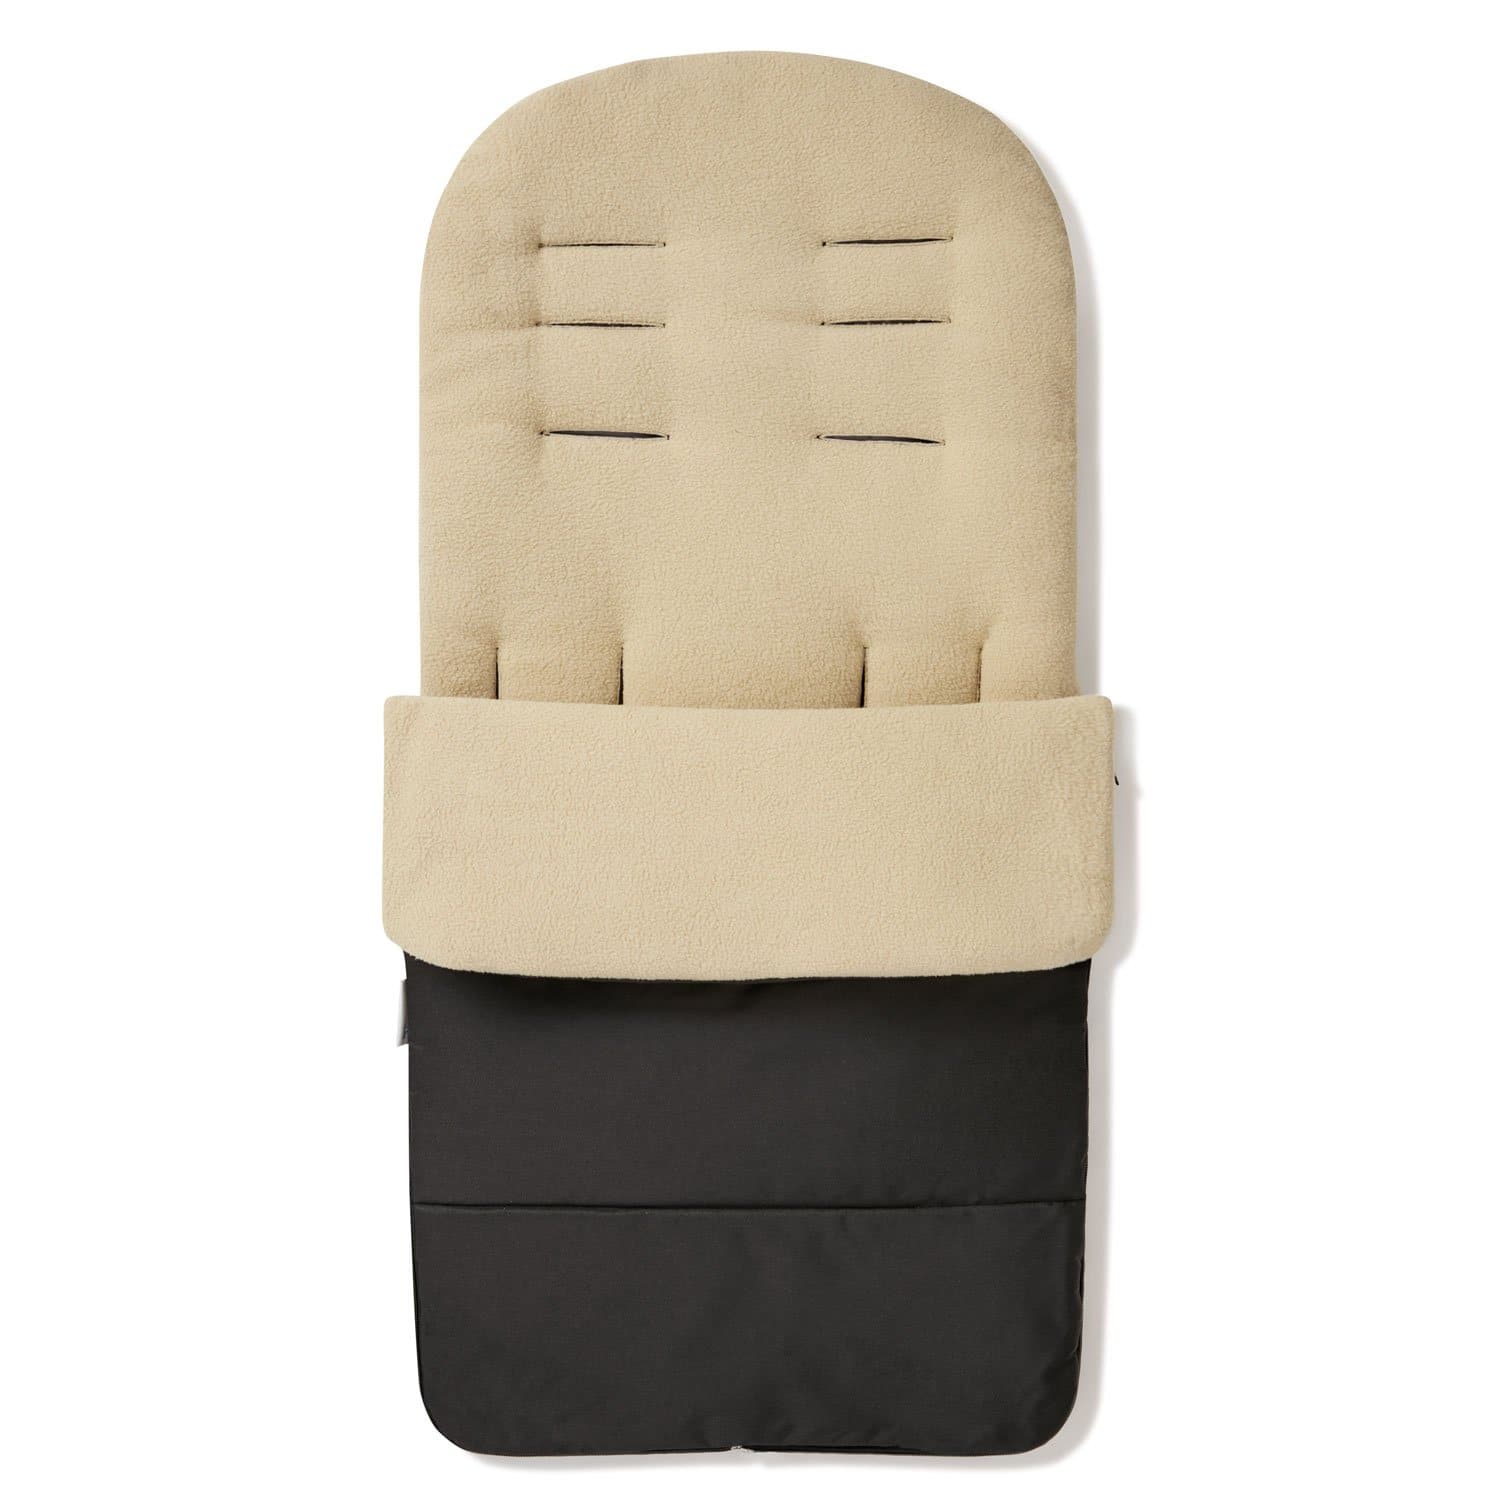 Premium Footmuff / Cosy Toes Compatible with Bebe 9 - For Your Little One